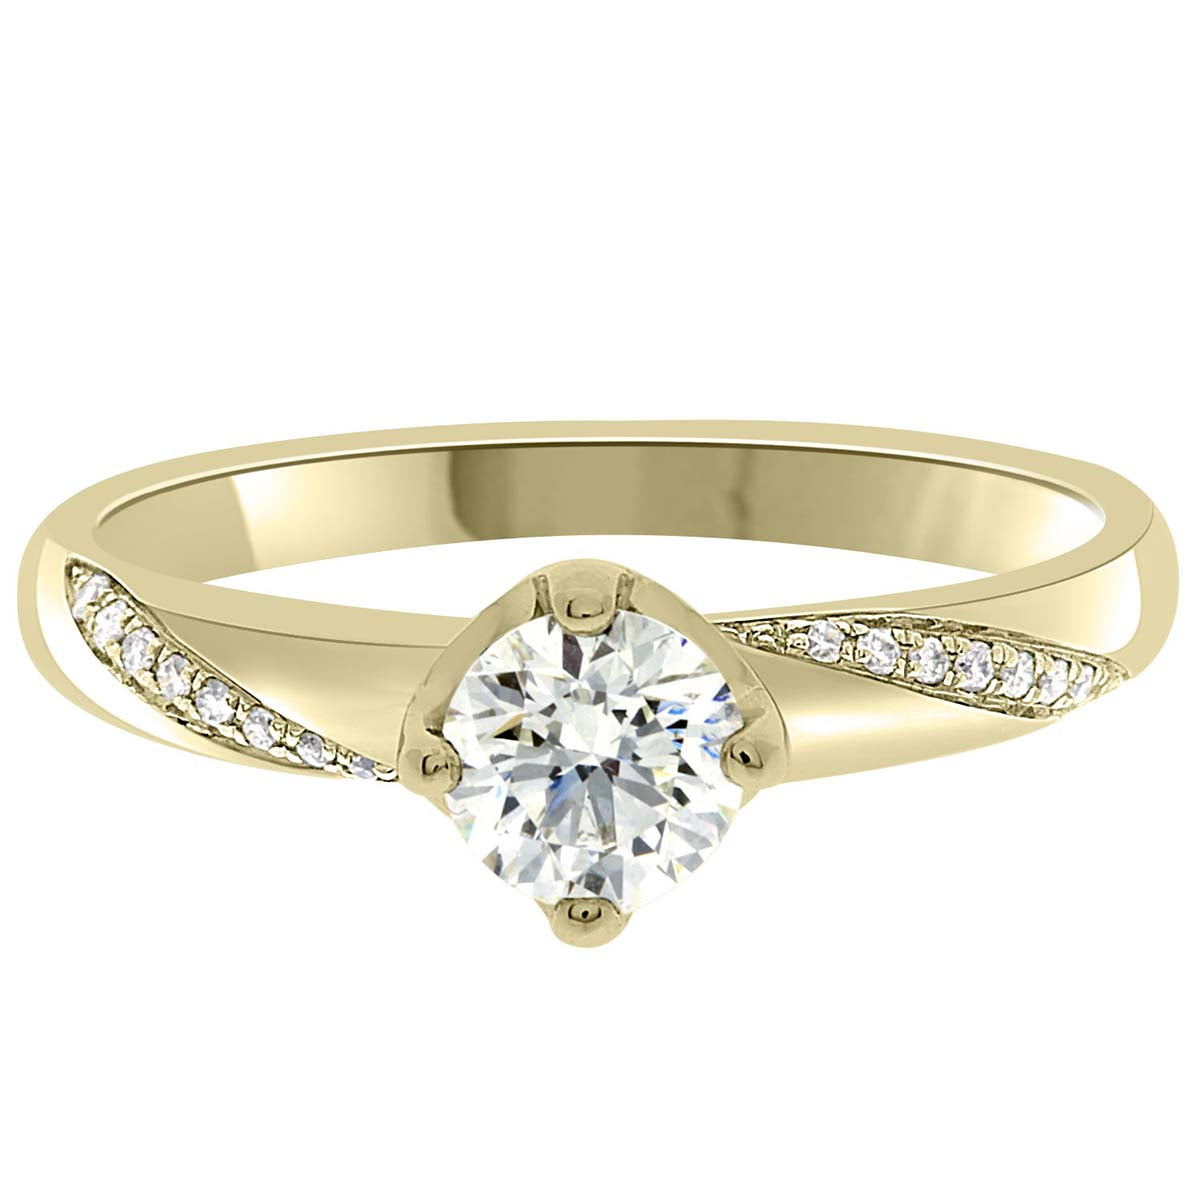 Crossover Band Engagement Ring made from yellow gold